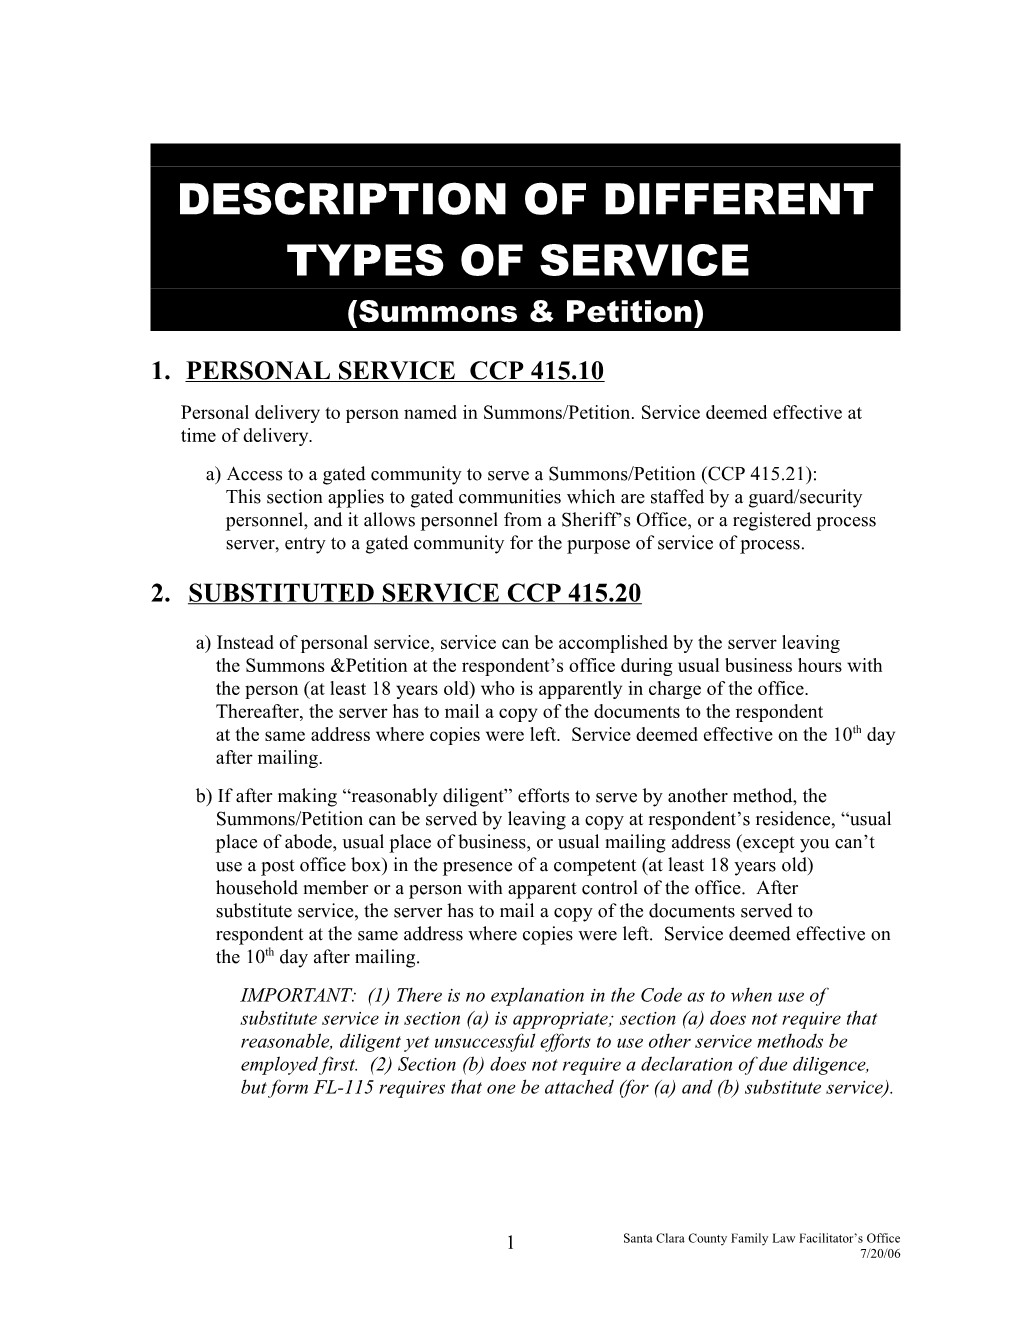 Description of Different Types of Service